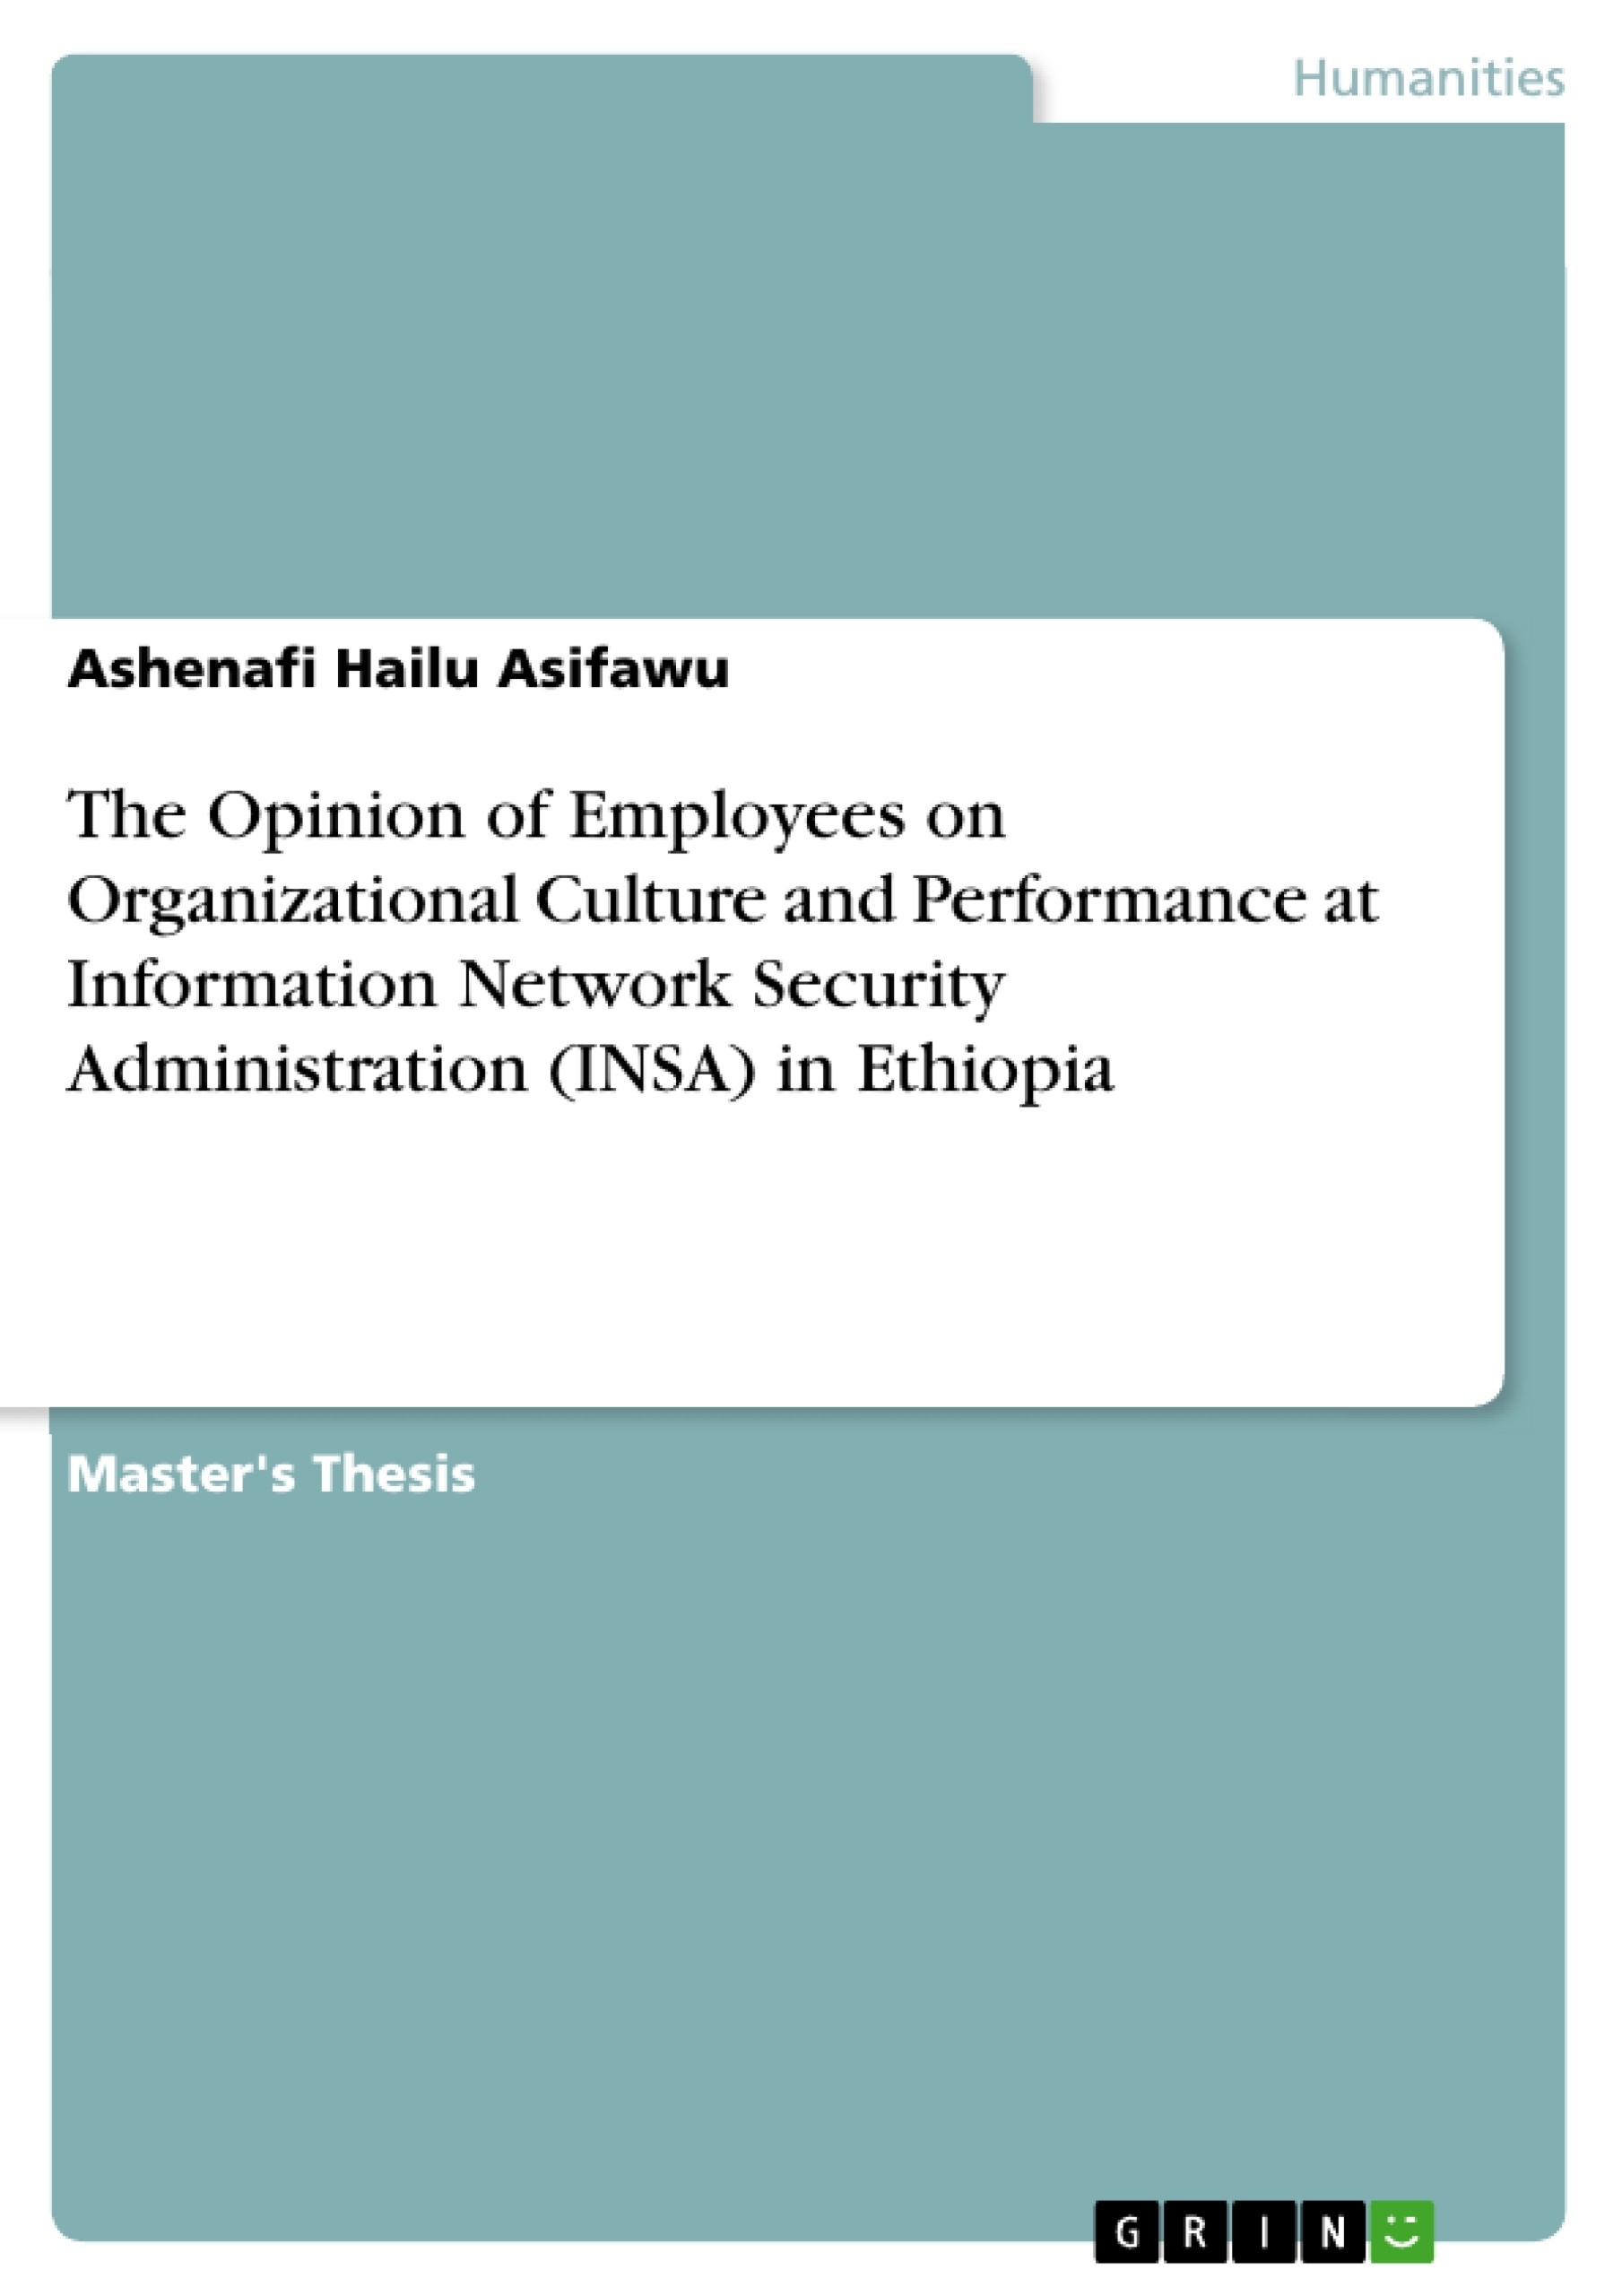 Título: The Opinion of Employees on Organizational Culture and Performance at Information Network Security Administration (INSA) in Ethiopia